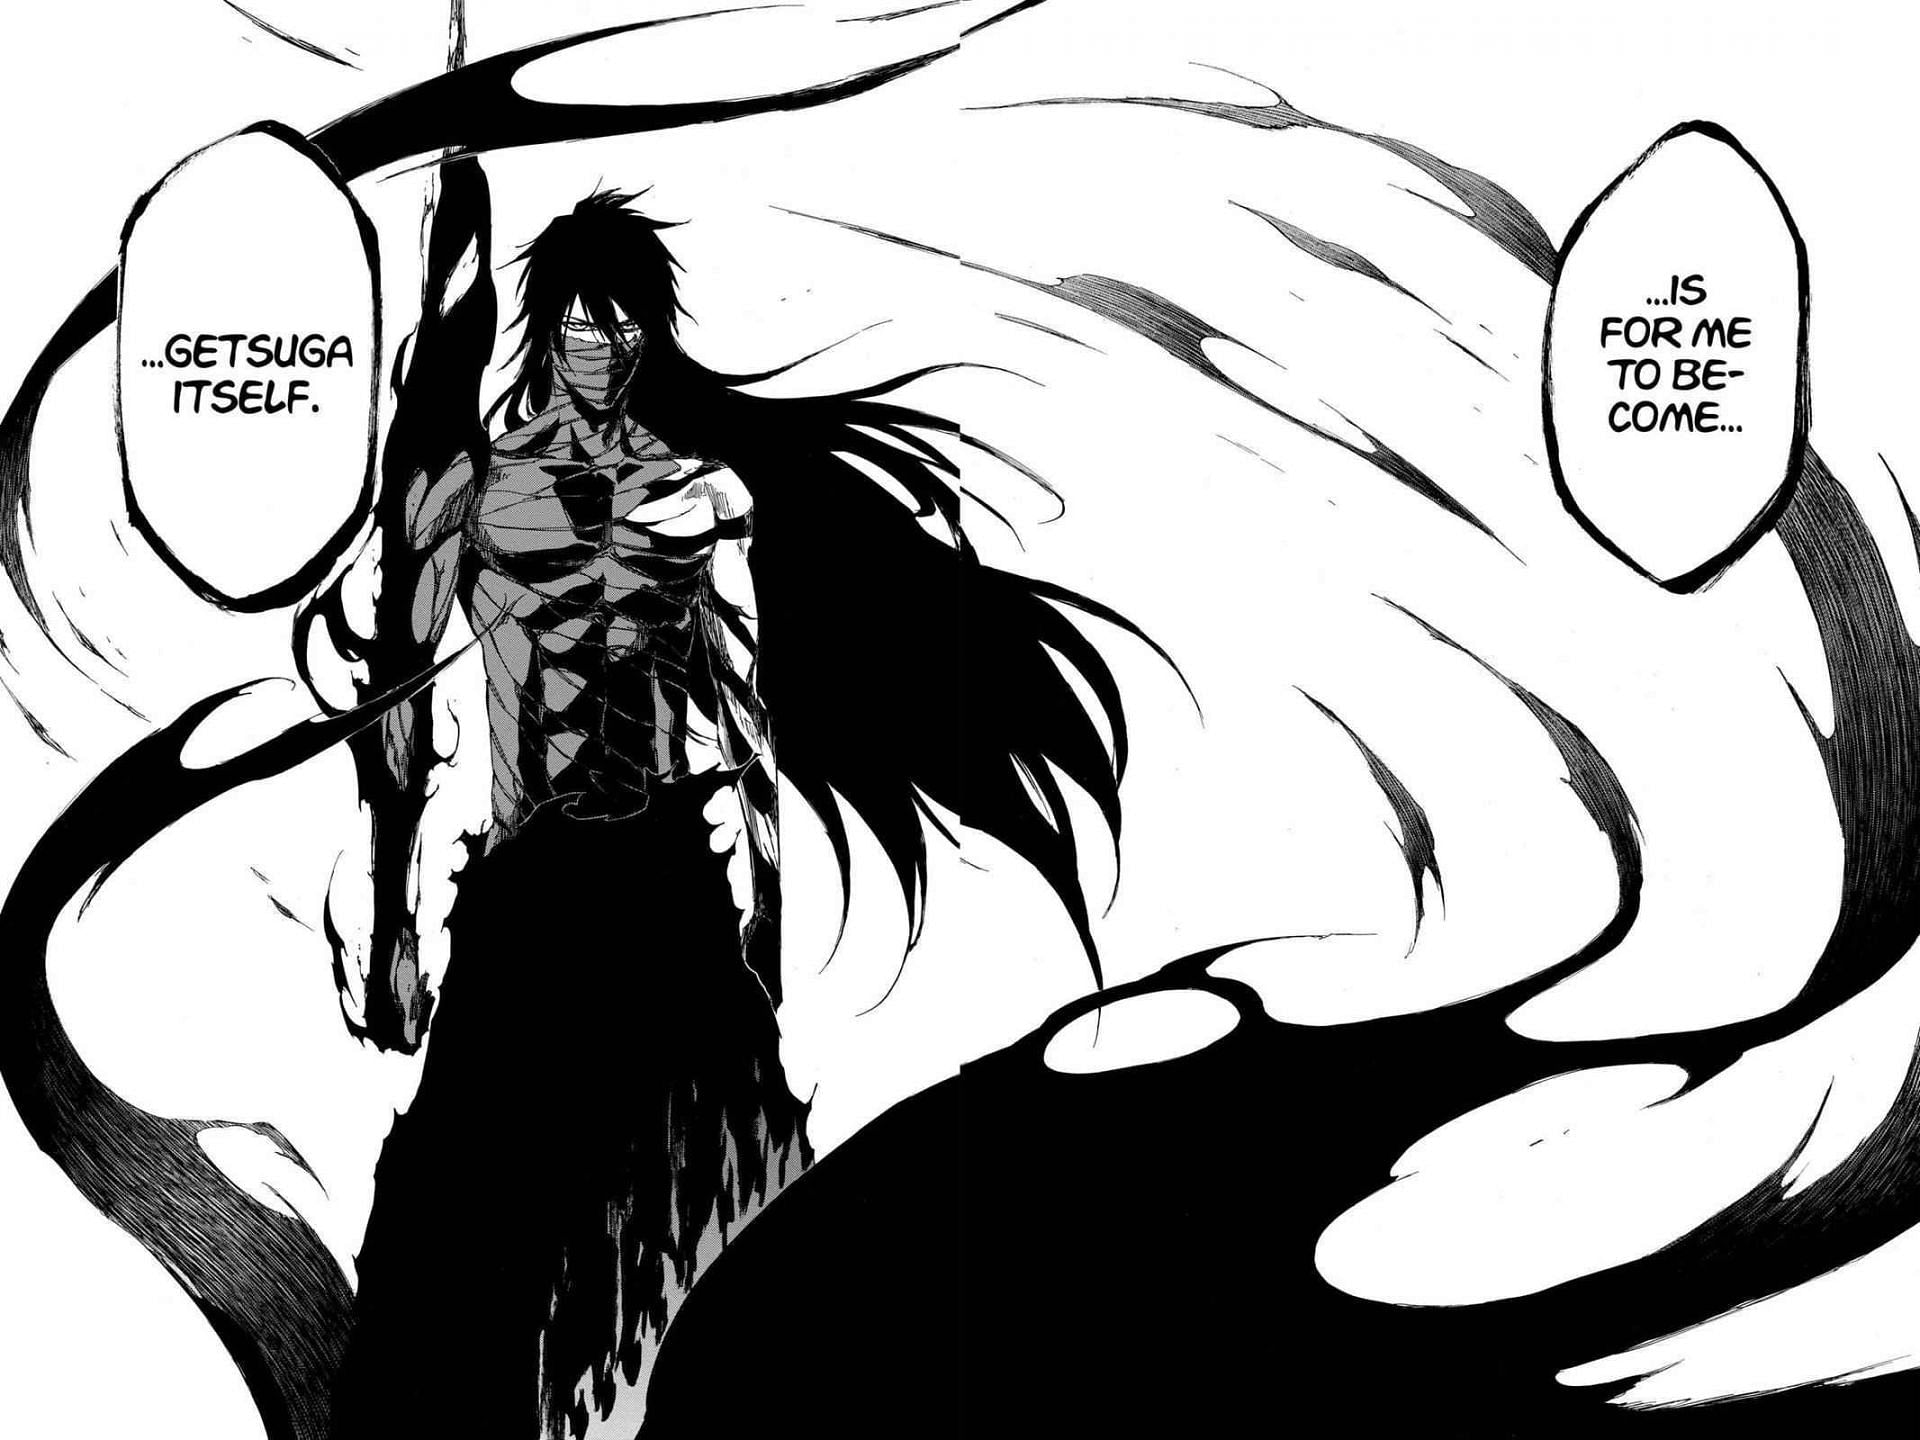 One of the definitive anime transformations in Bleach (Image via Shueisha).